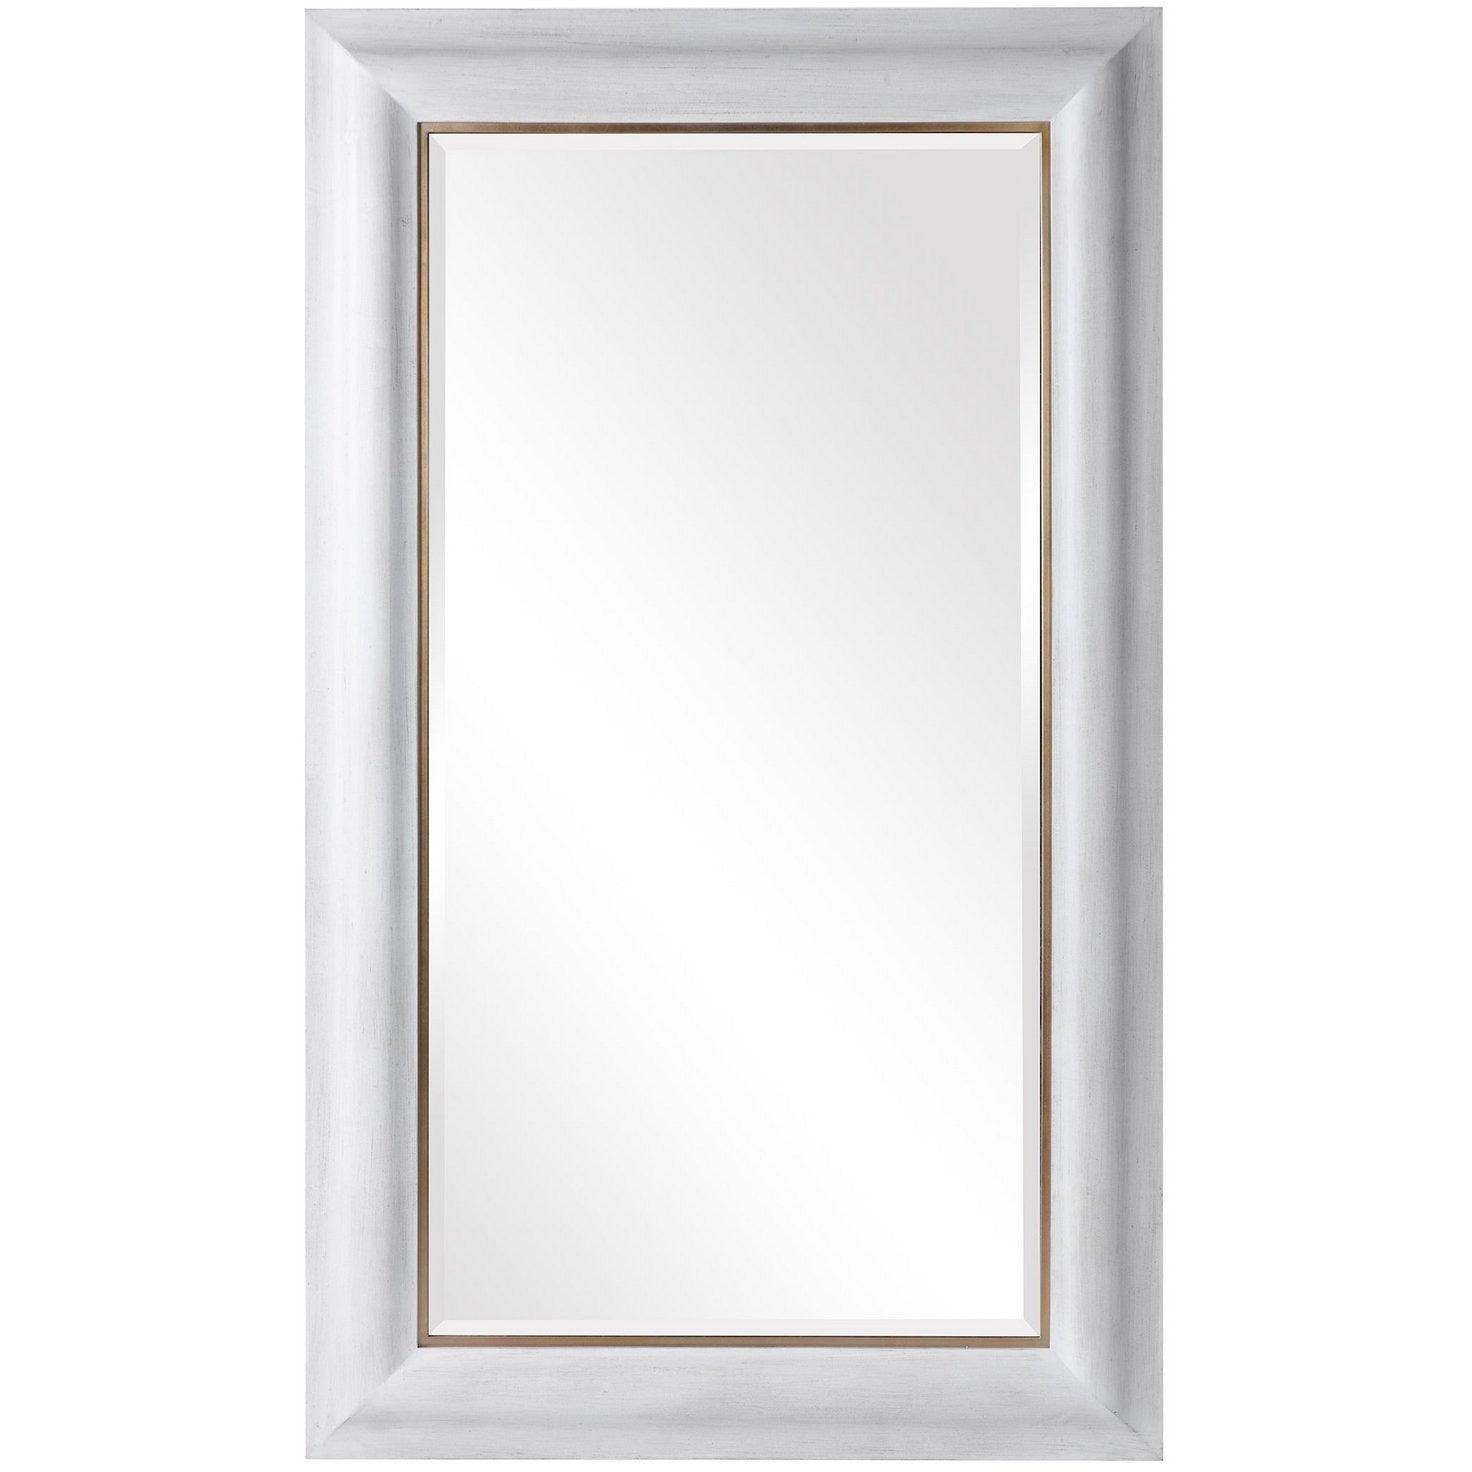 The Uttermost - Piper Mirror - 09609 | Montreal Lighting & Hardware